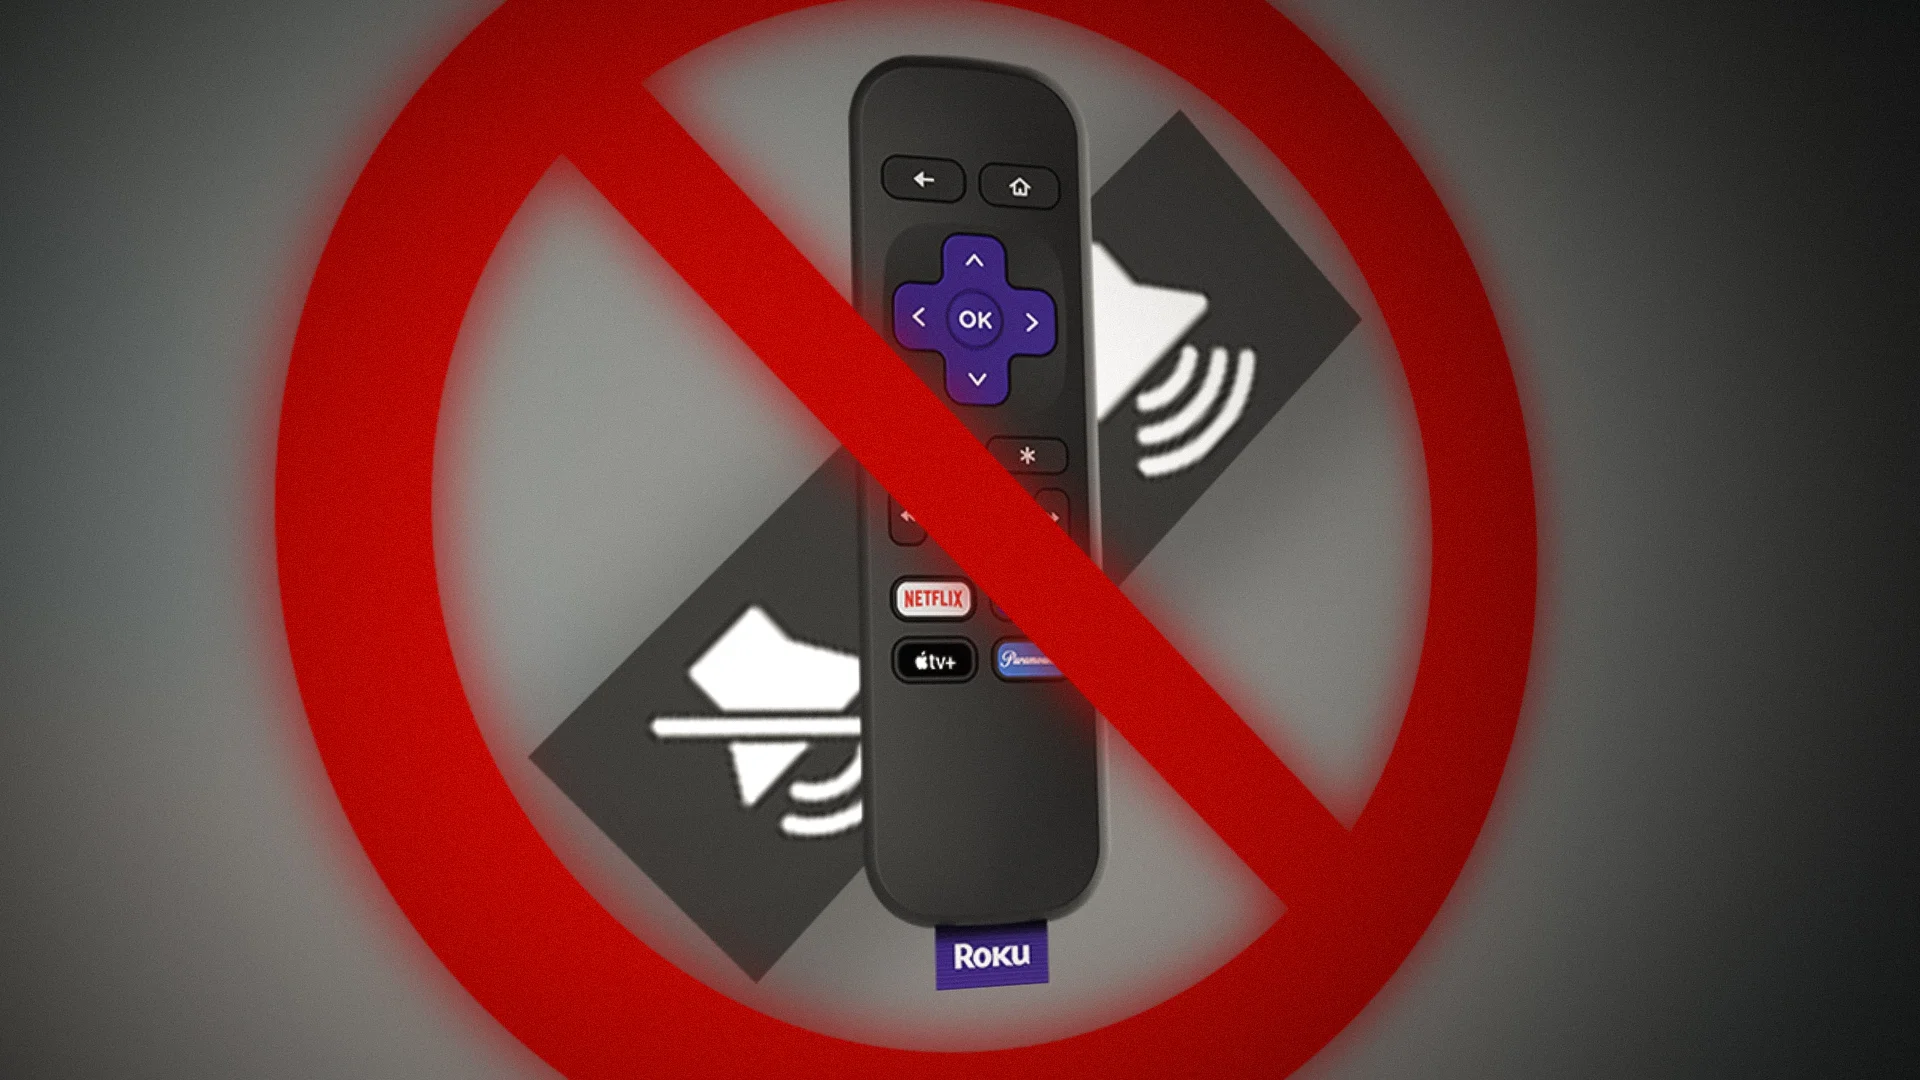 Updating the Roku Device and Remote